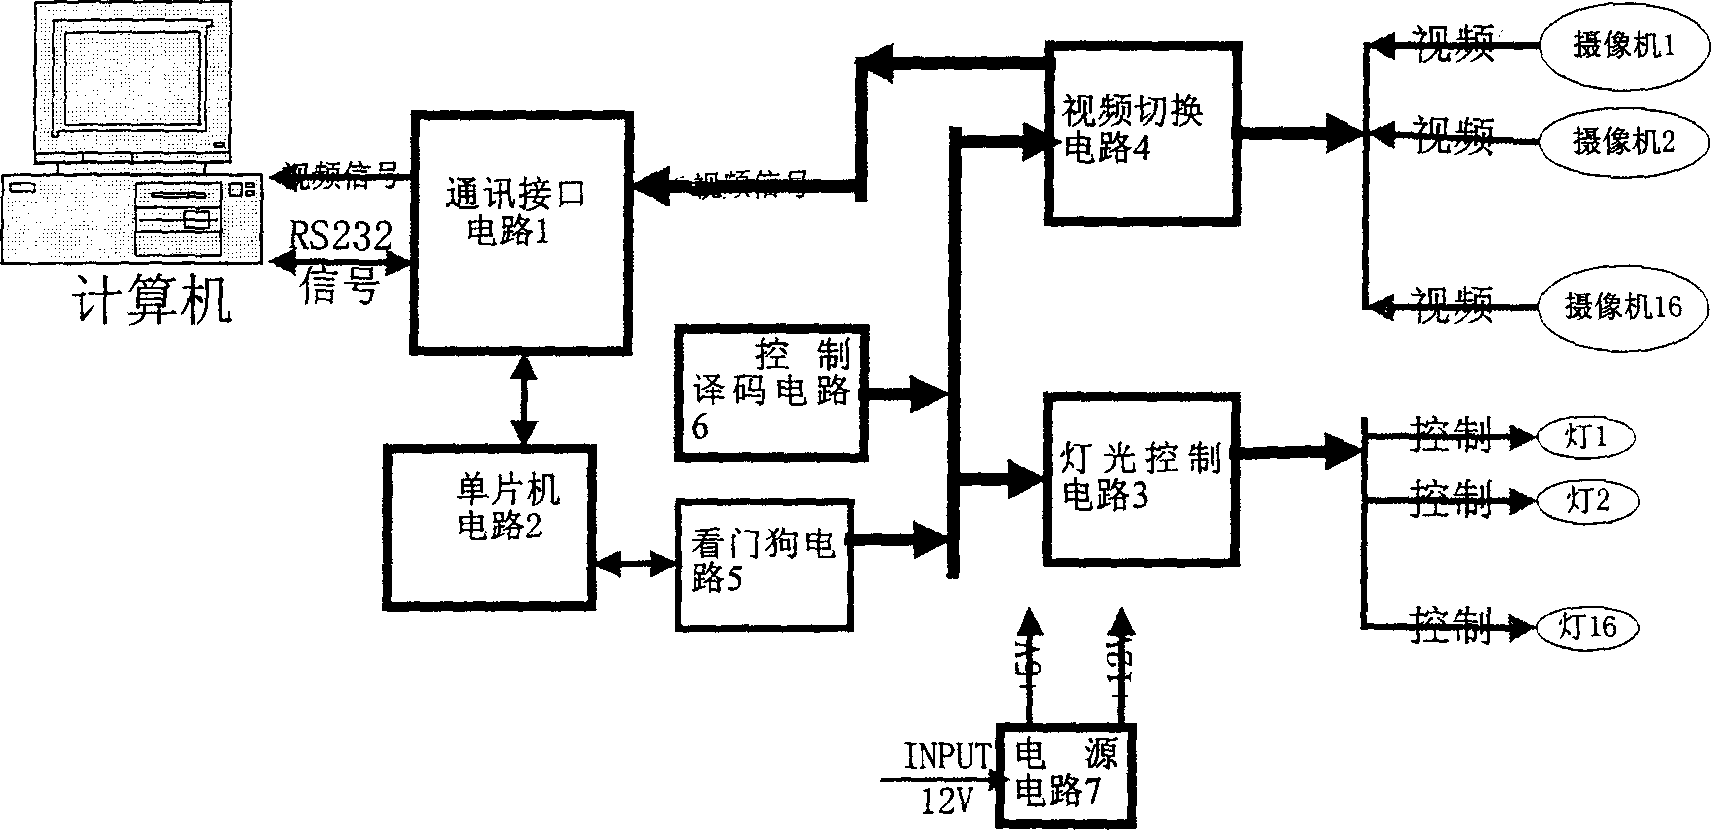 Light and vedio frequency switching integrated controller